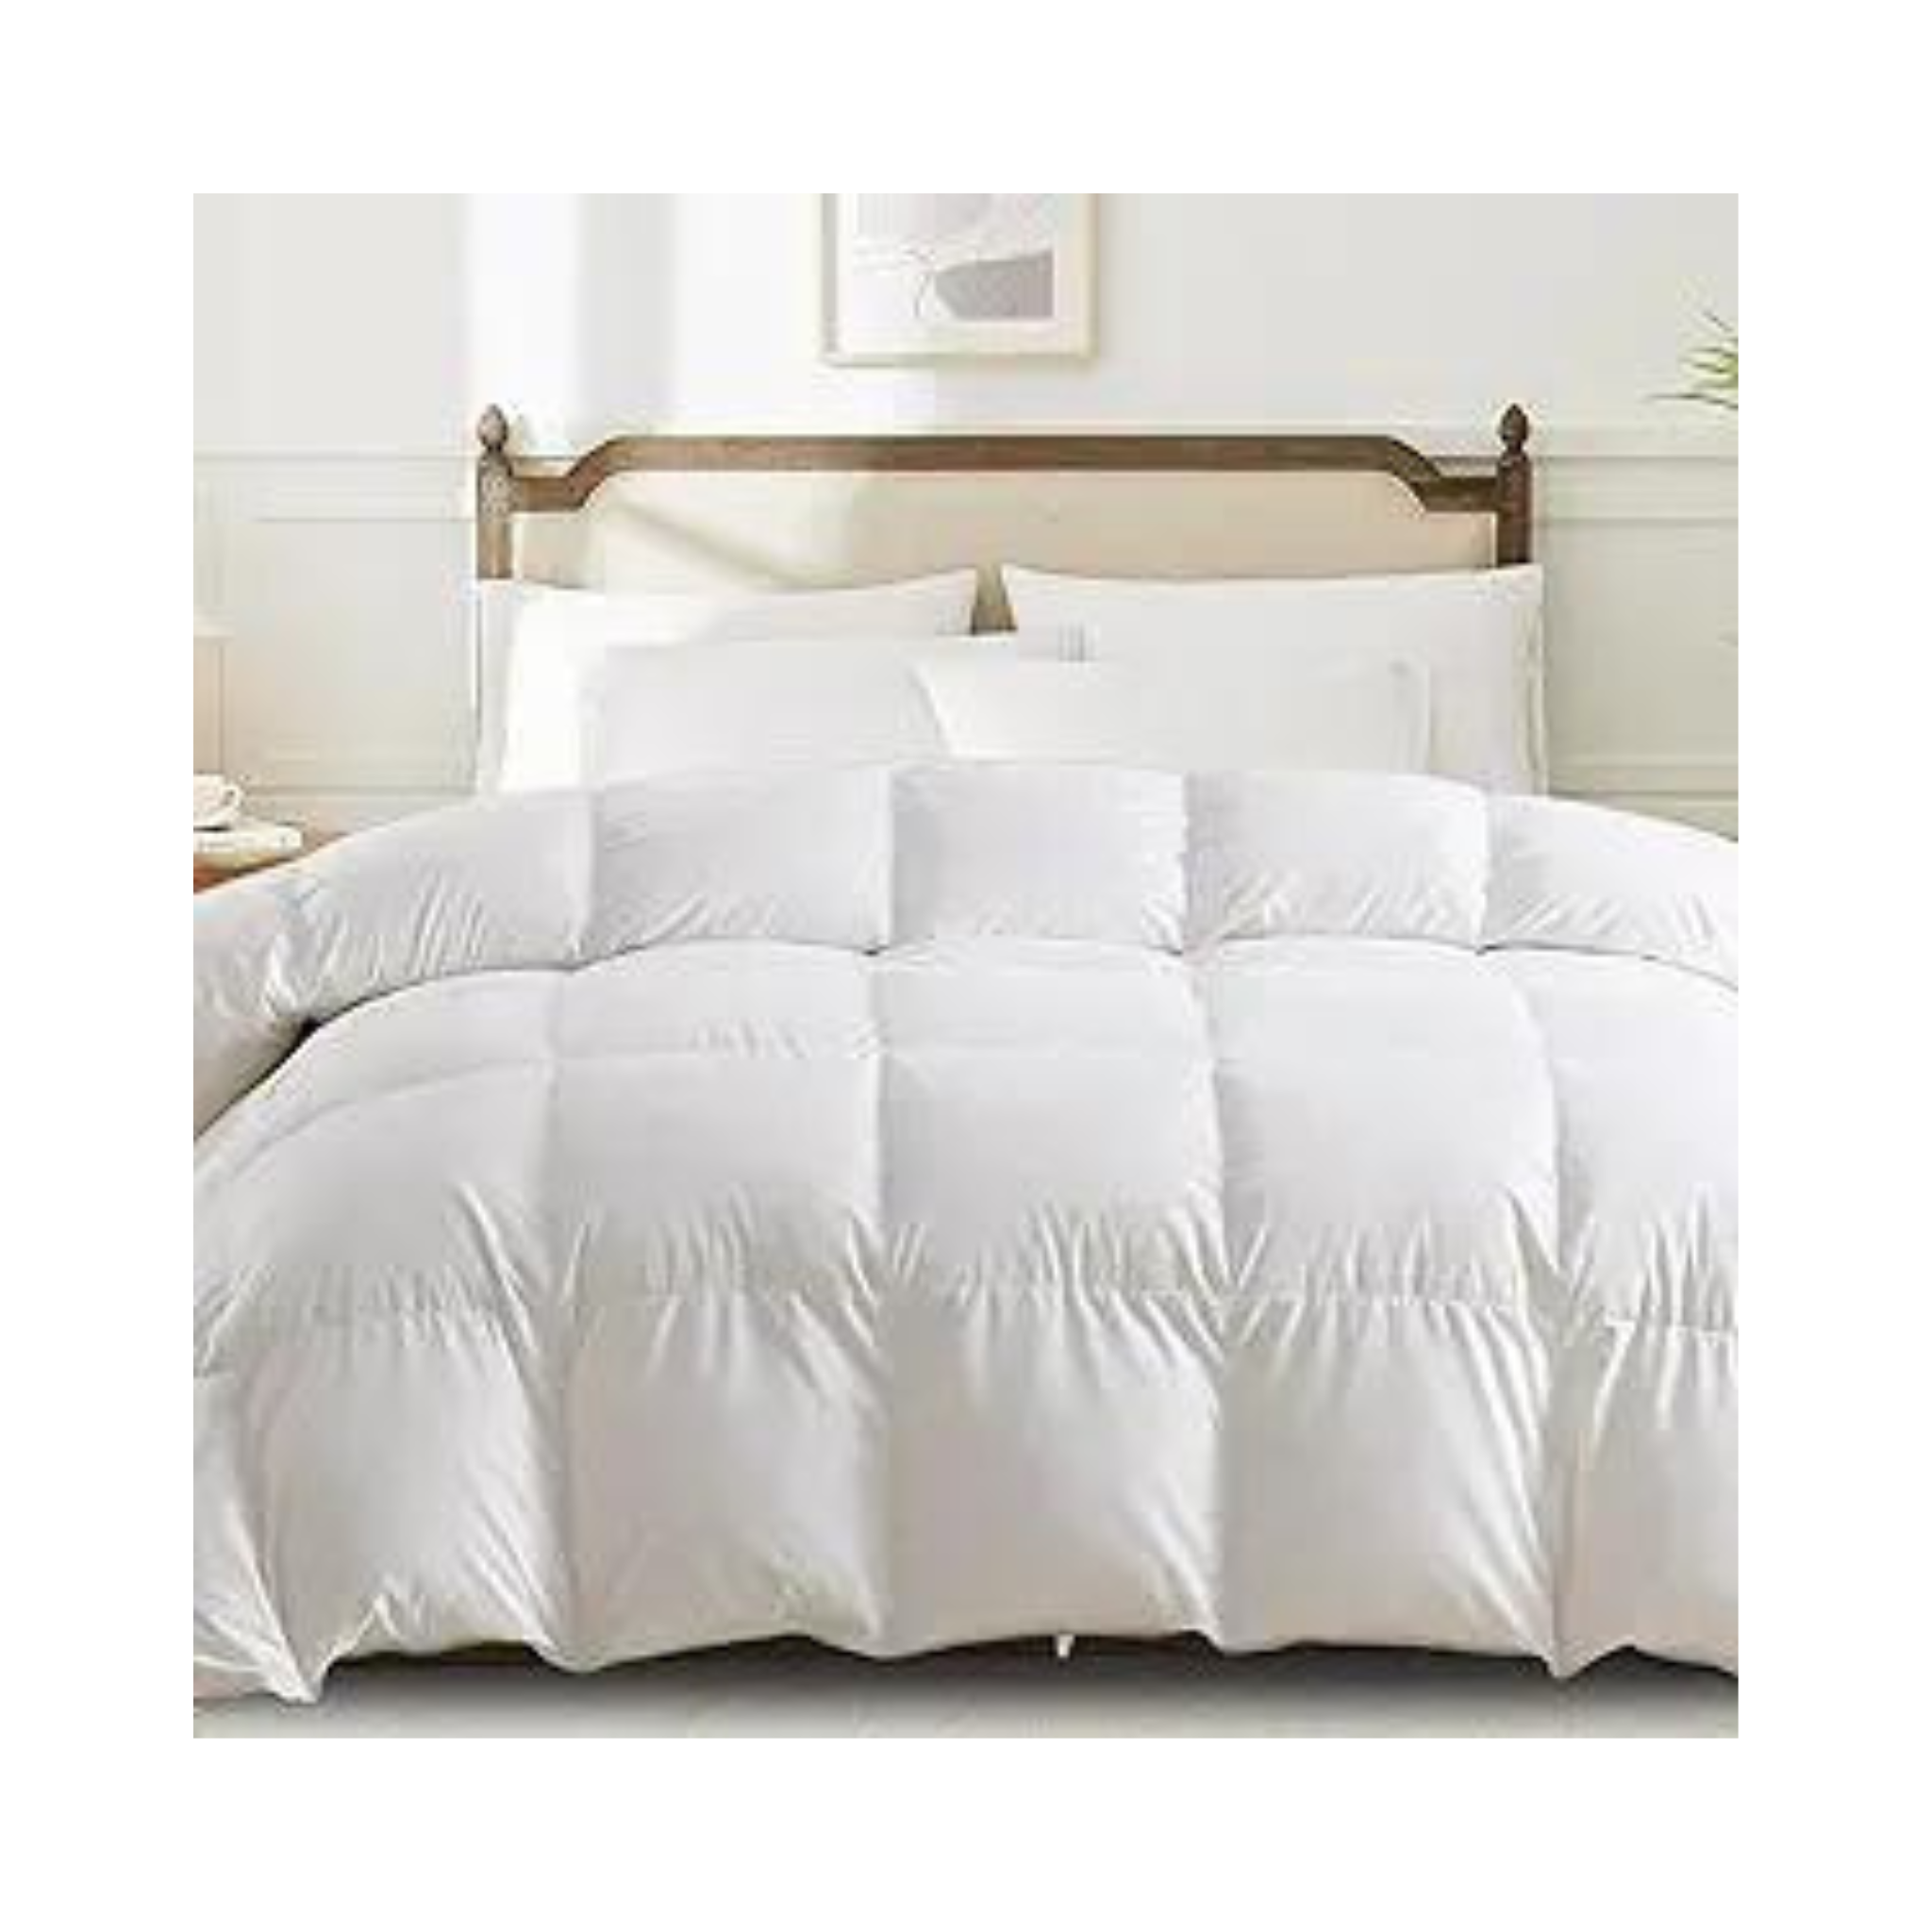 Homemate Goose Feather Down Comforters Duvet Inserts, Twin Size